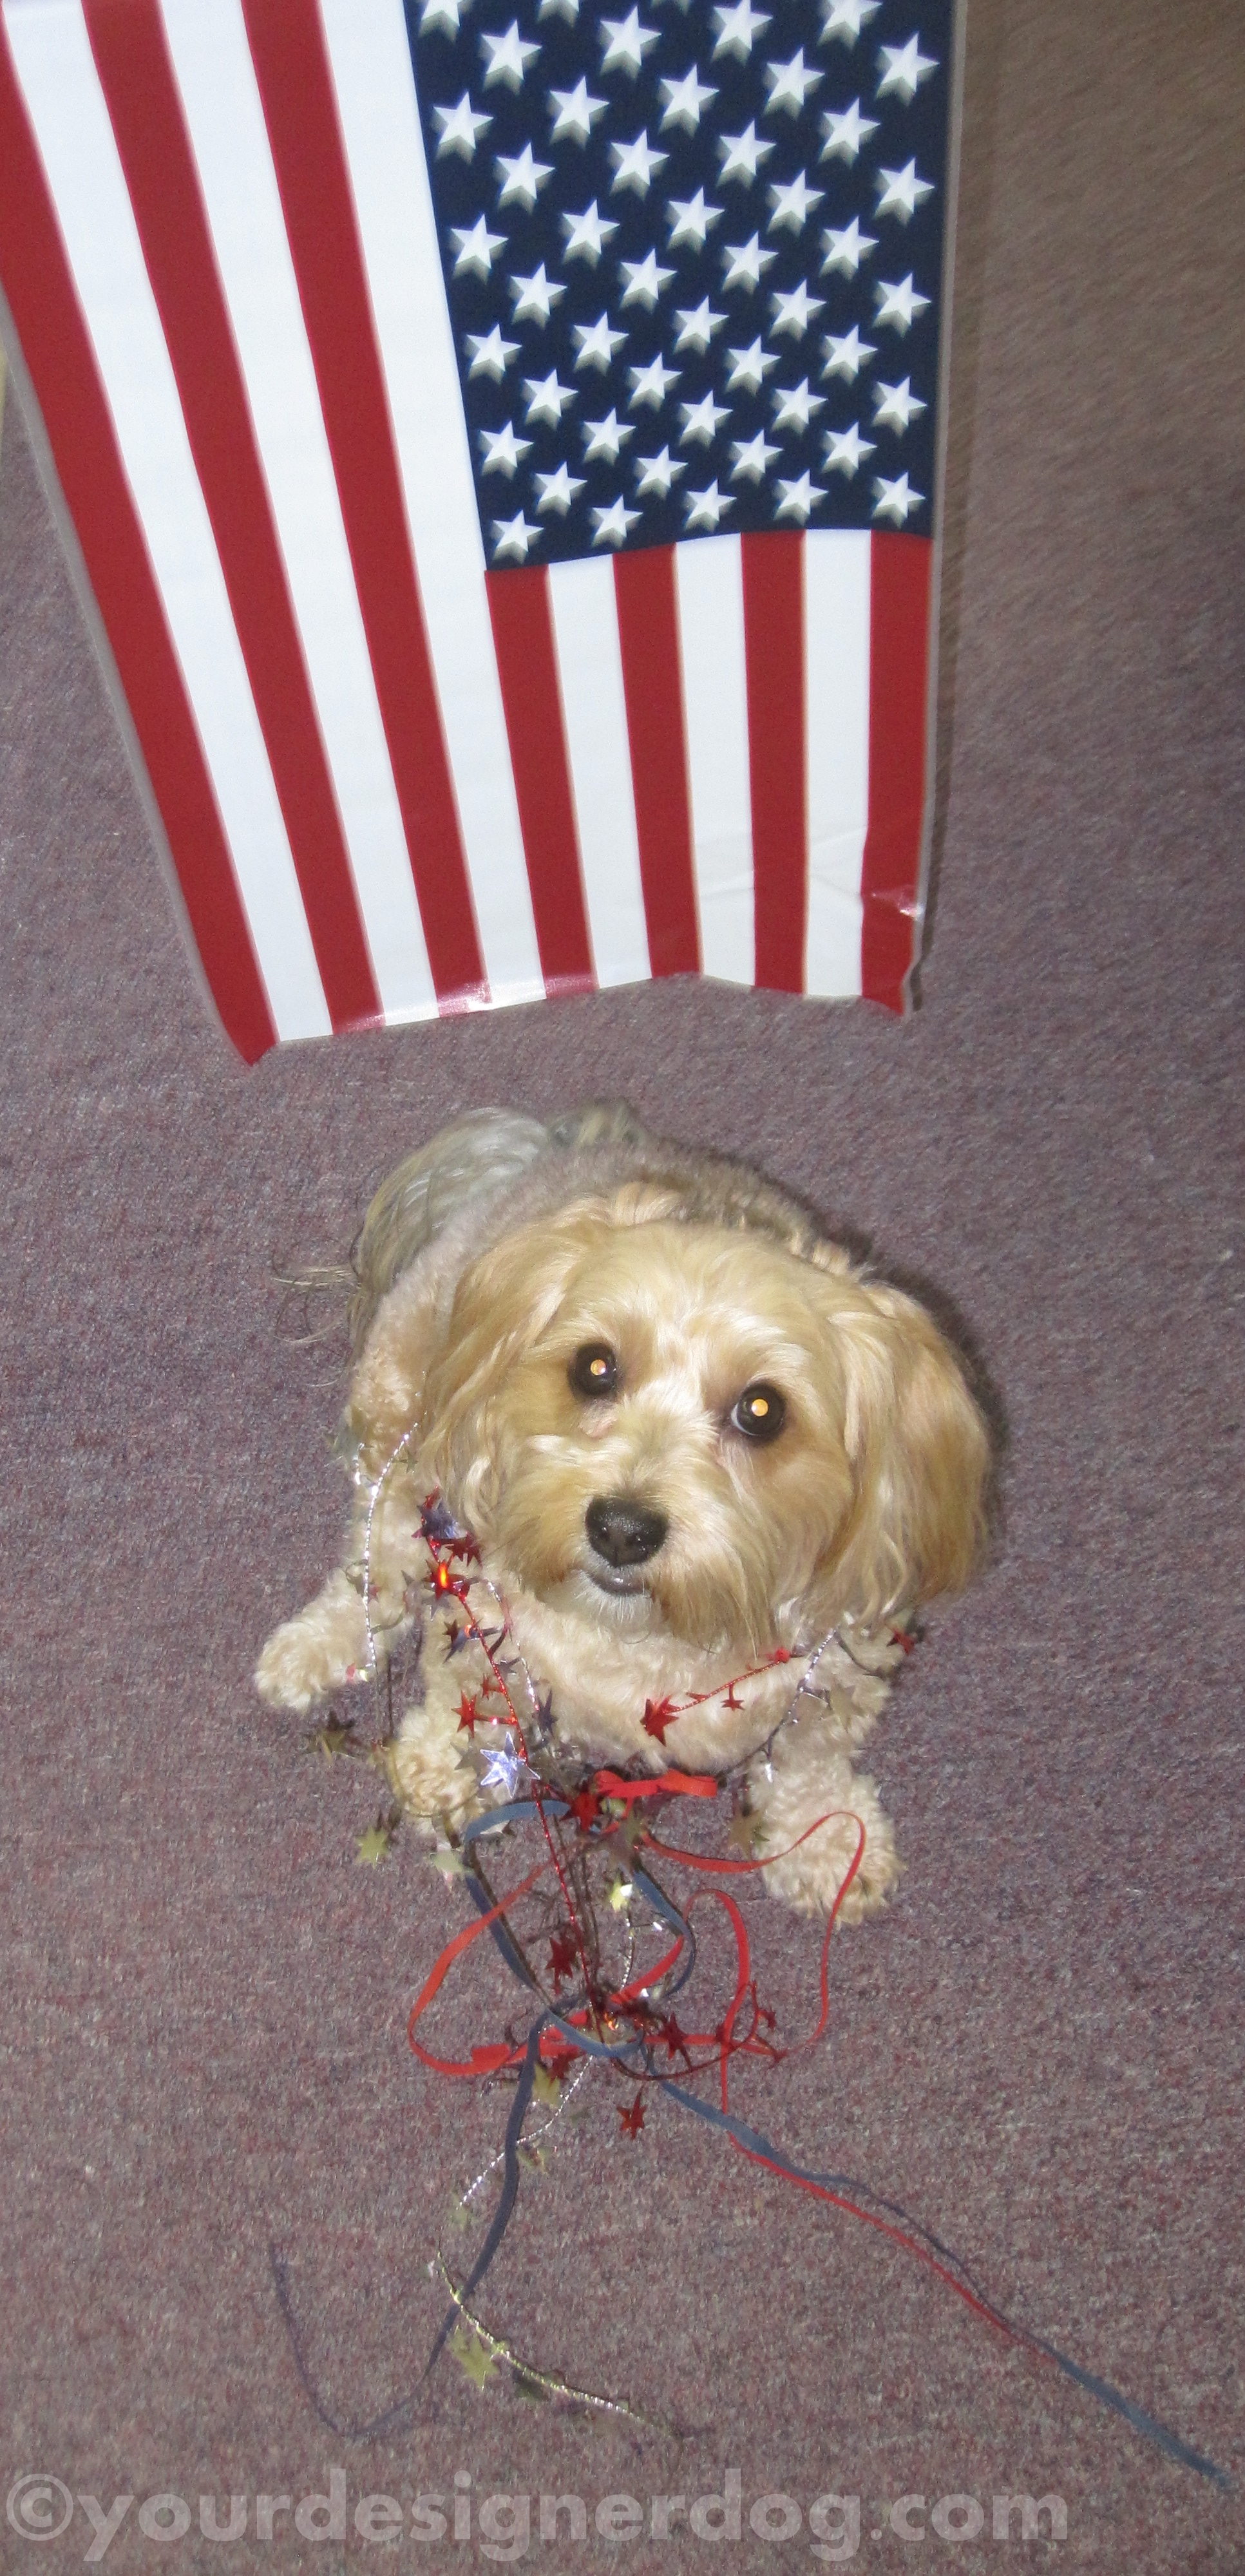 dogs, designer dogs, yorkipoo, yorkie poo, flag, patriotic, 4th of july